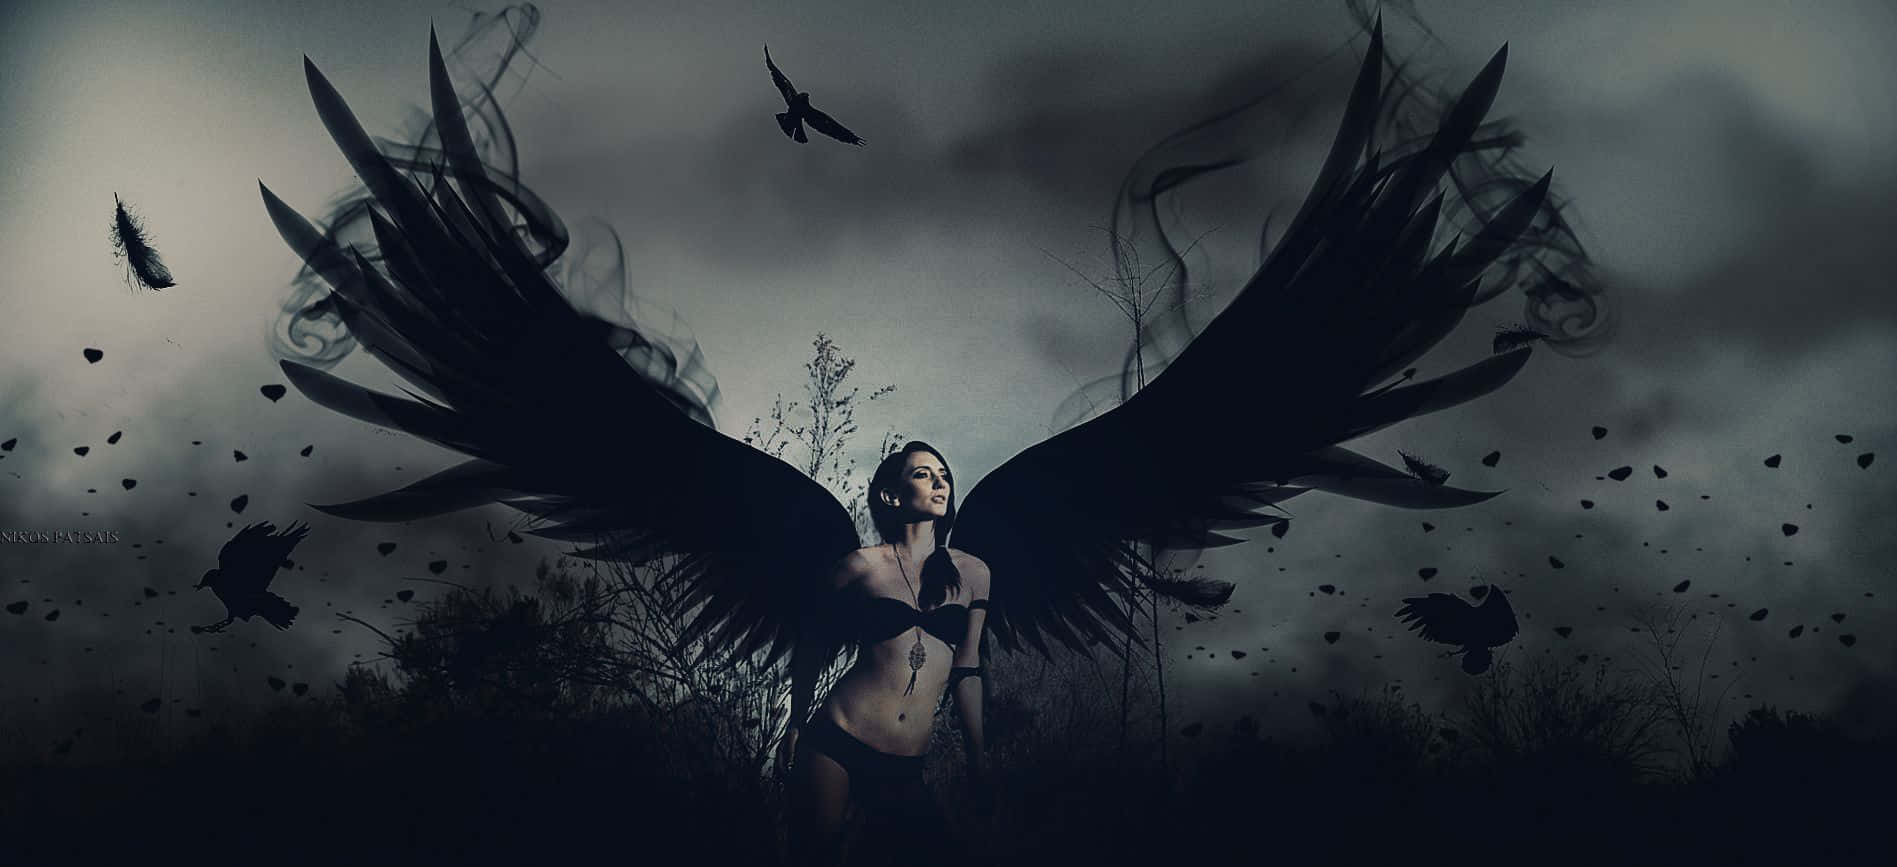 A Woman With Wings In The Dark